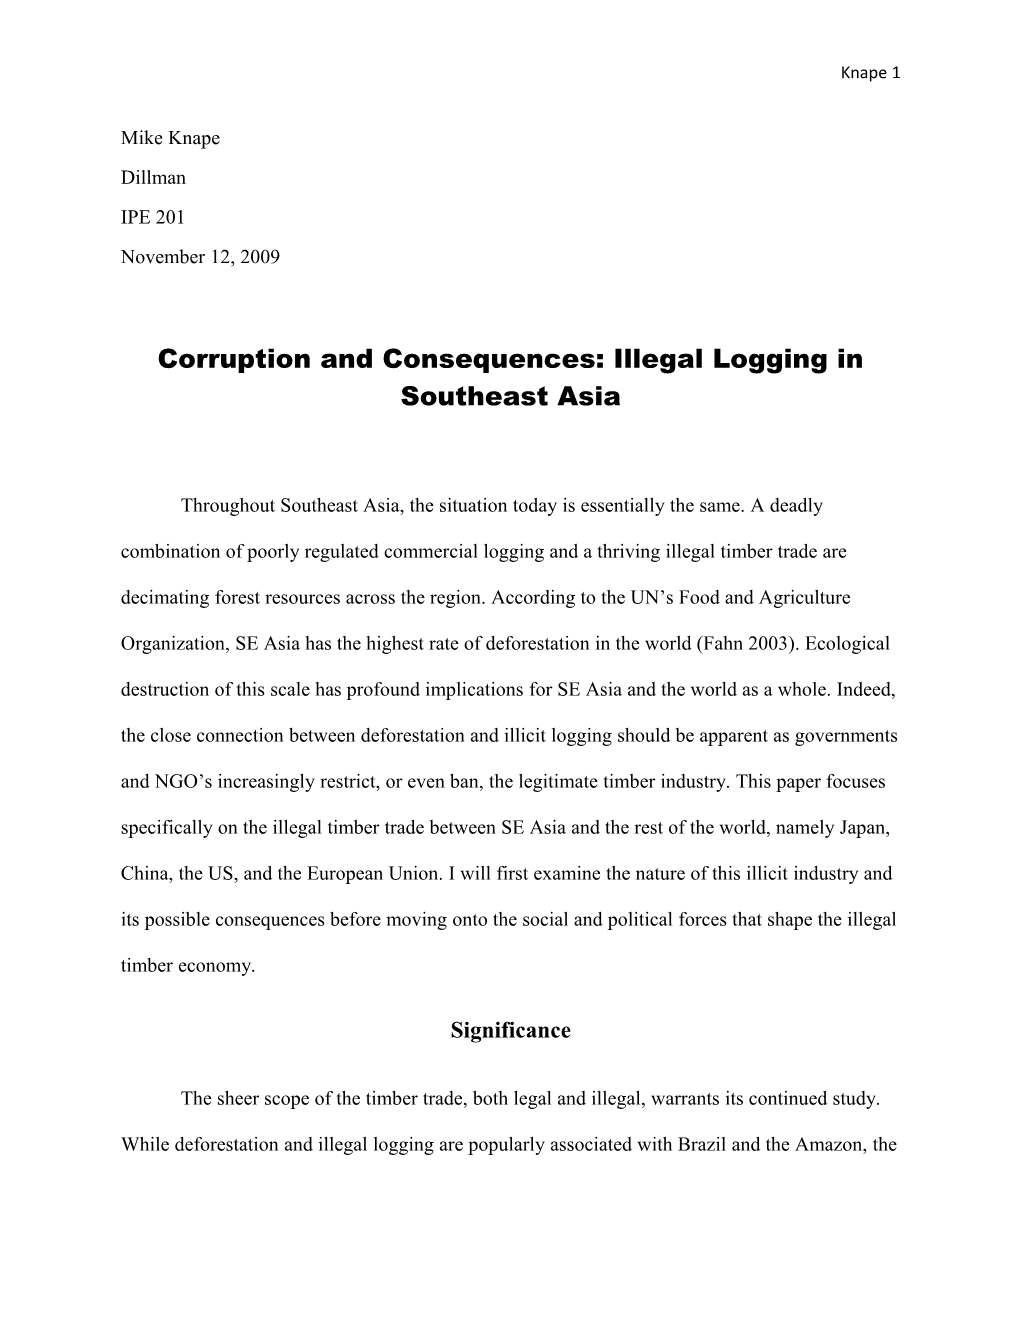 Corruption and Consequences: Illegal Logging in Southeast Asia